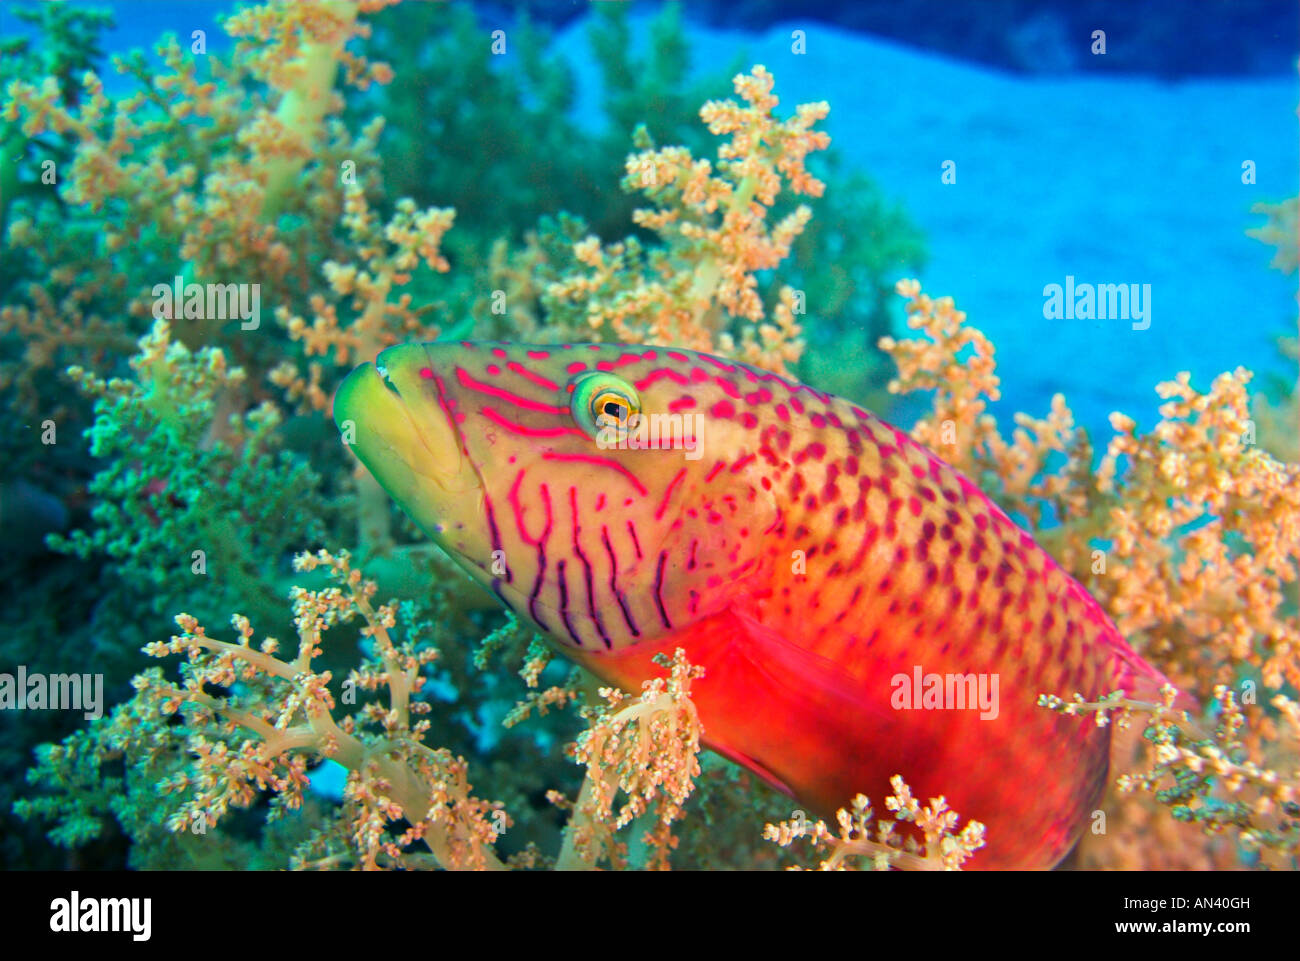 "Cheeklined wrasse" Oxycheilinus digramma fish in "broccoli soft coral" Red Sea Stock Photo